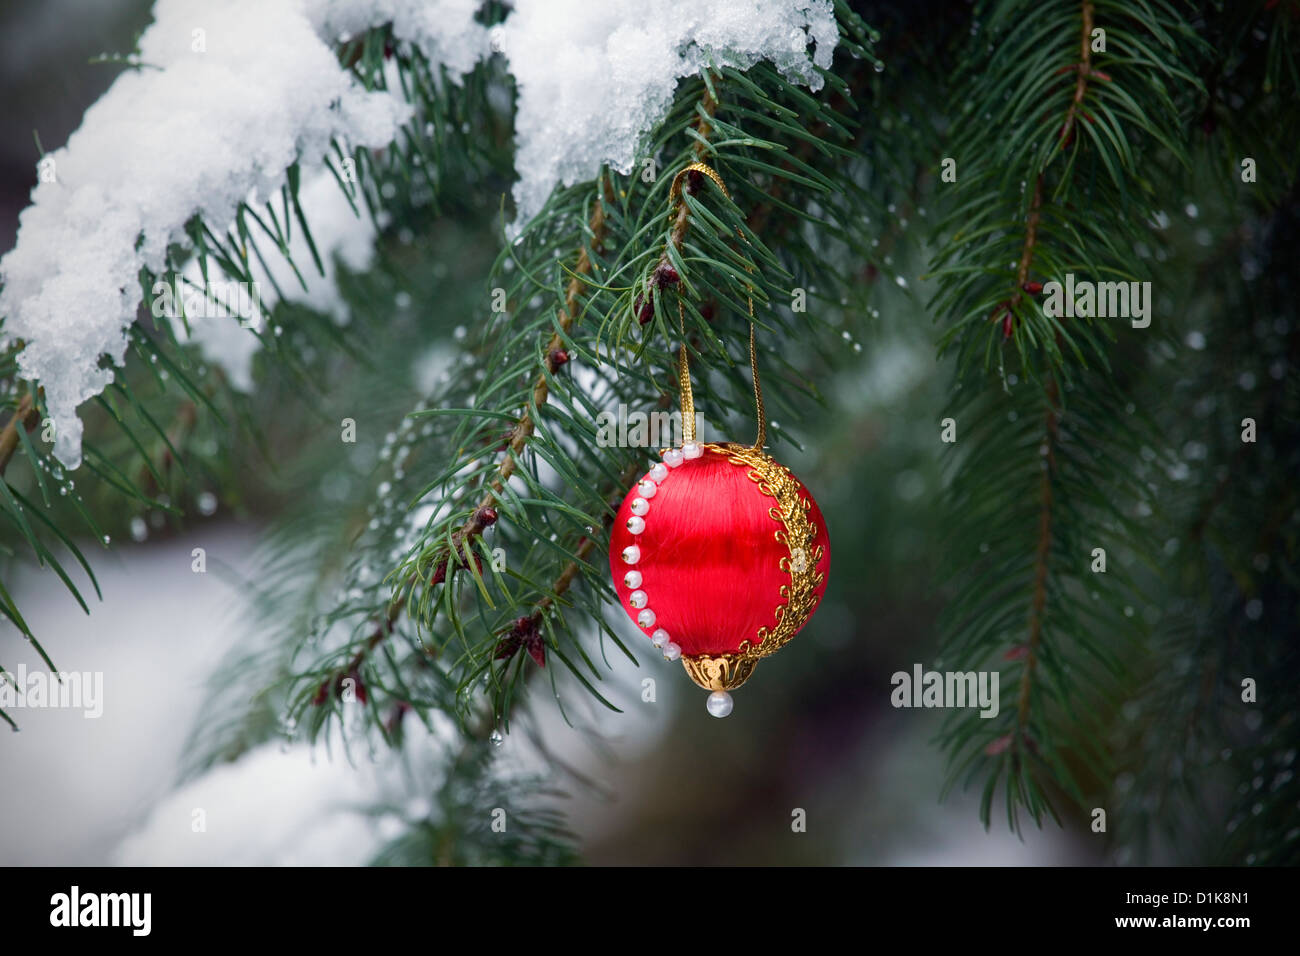 WA06223-00...WASHINGTON - Christmas ornament decorating a snow covered tree in the outdoors. Stock Photo